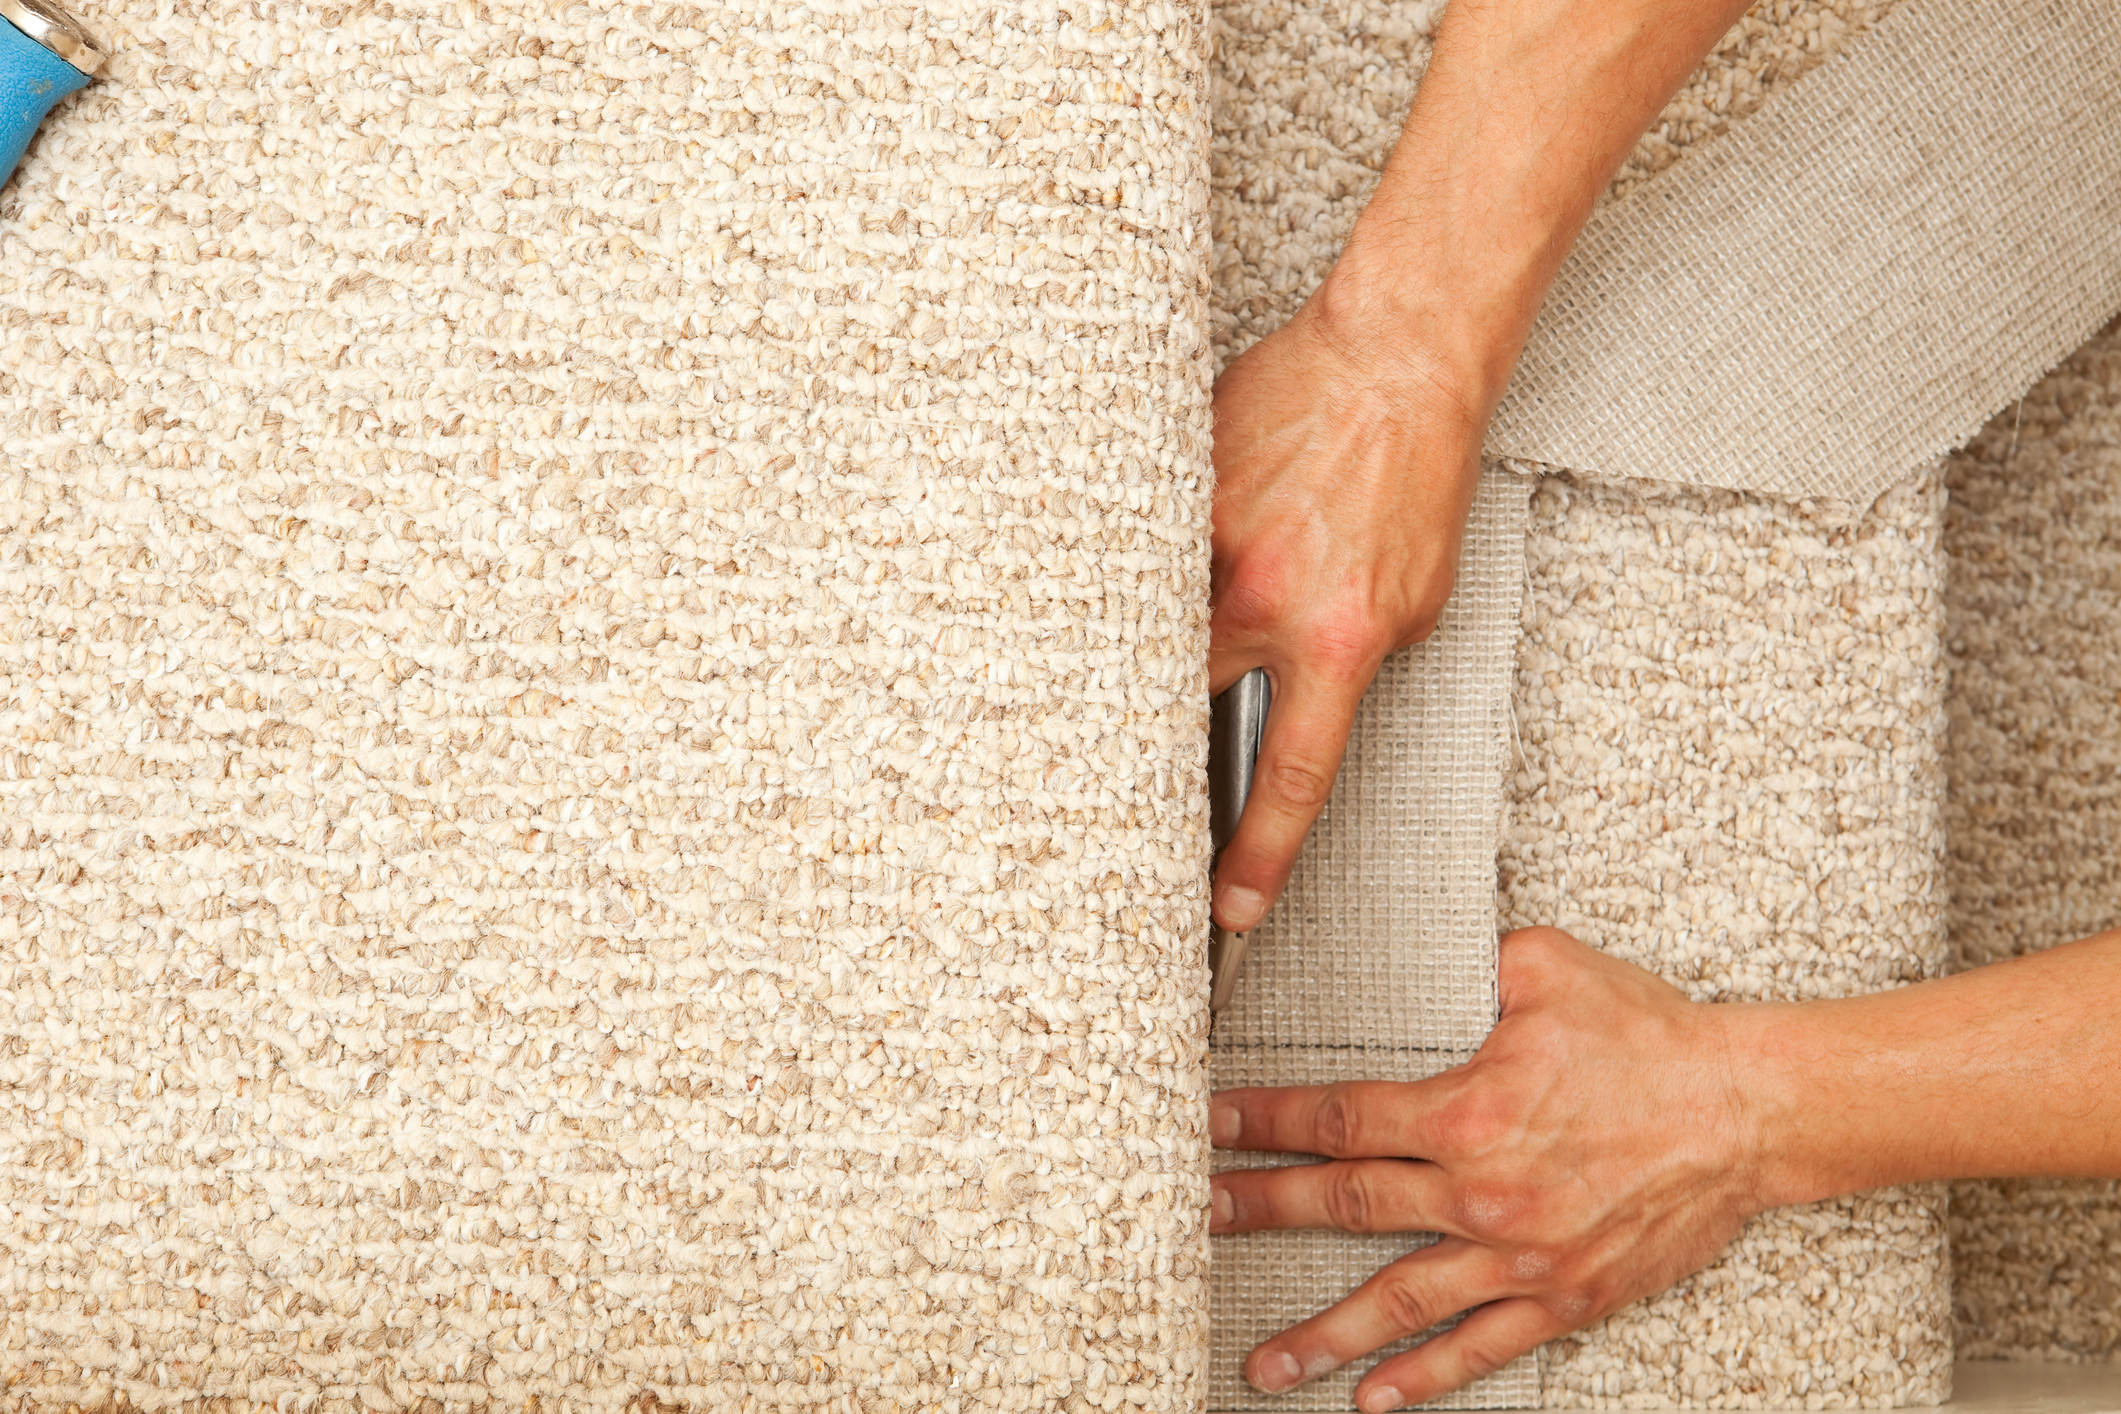 How to Choose the Best Carpet for Stairs